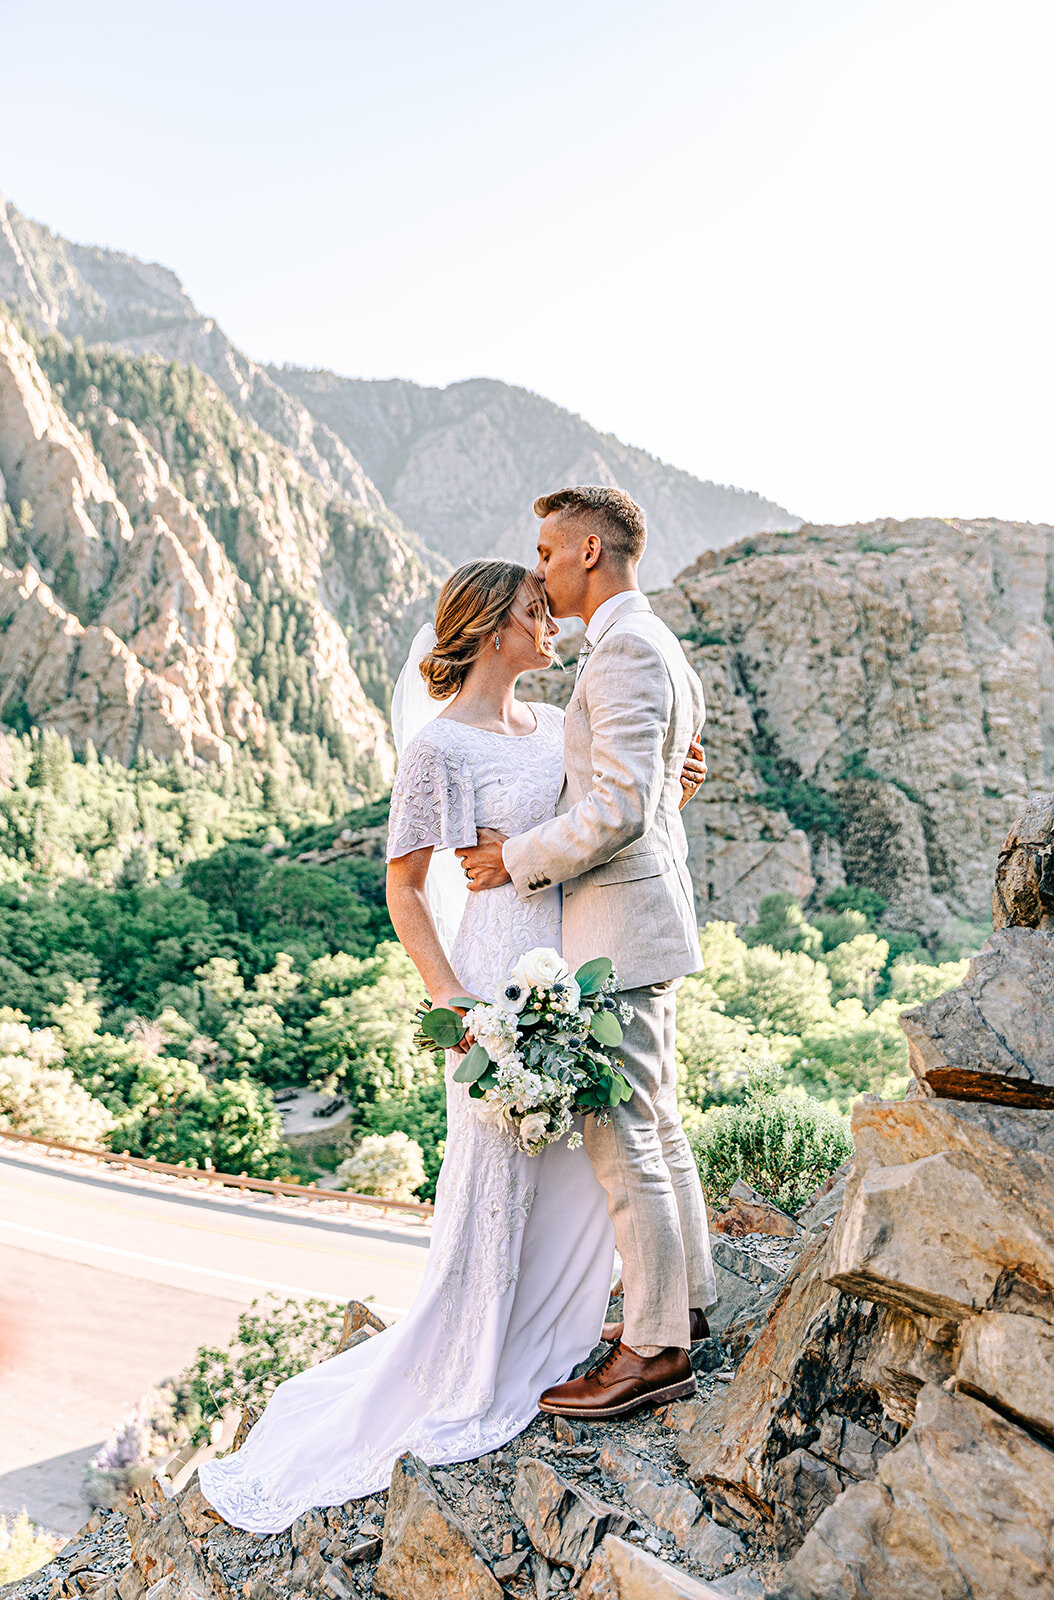  A soft kiss on the forehead of a glowing bride in a bright and airy Cottonwood Canyon in a wedding styled photo shoot. Wedding session location inspiration for modern Utah brides wedding inspiration professional Utah photographer summer wedding sess